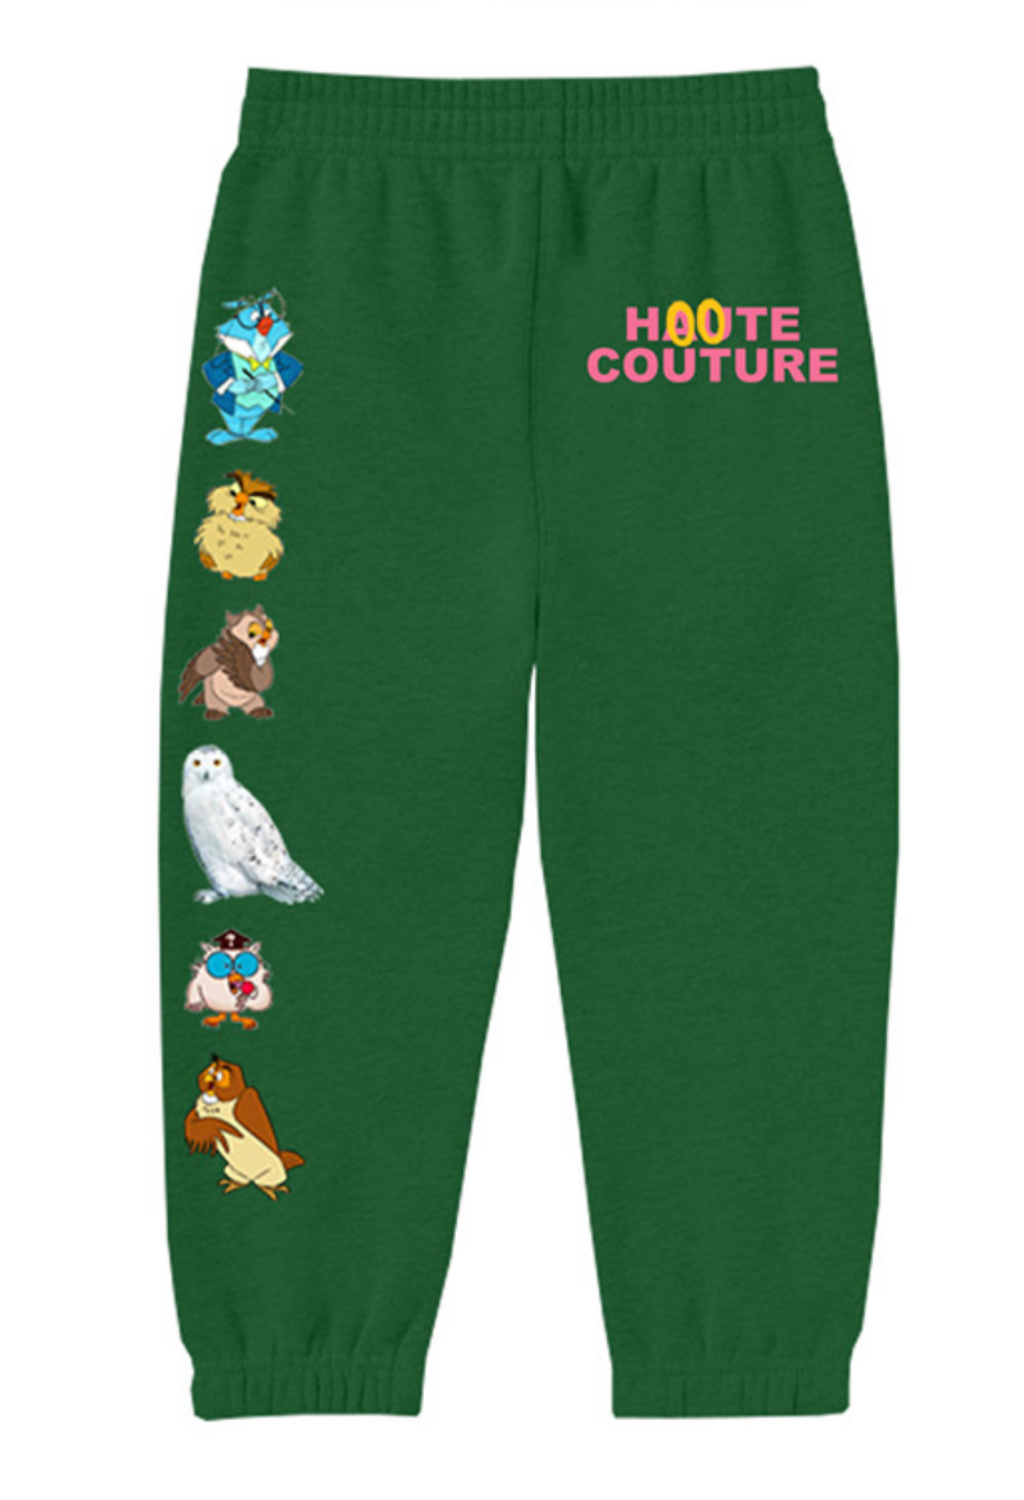 KIDS Cloney x Sycamore CC Hoote Couture Pants in Green